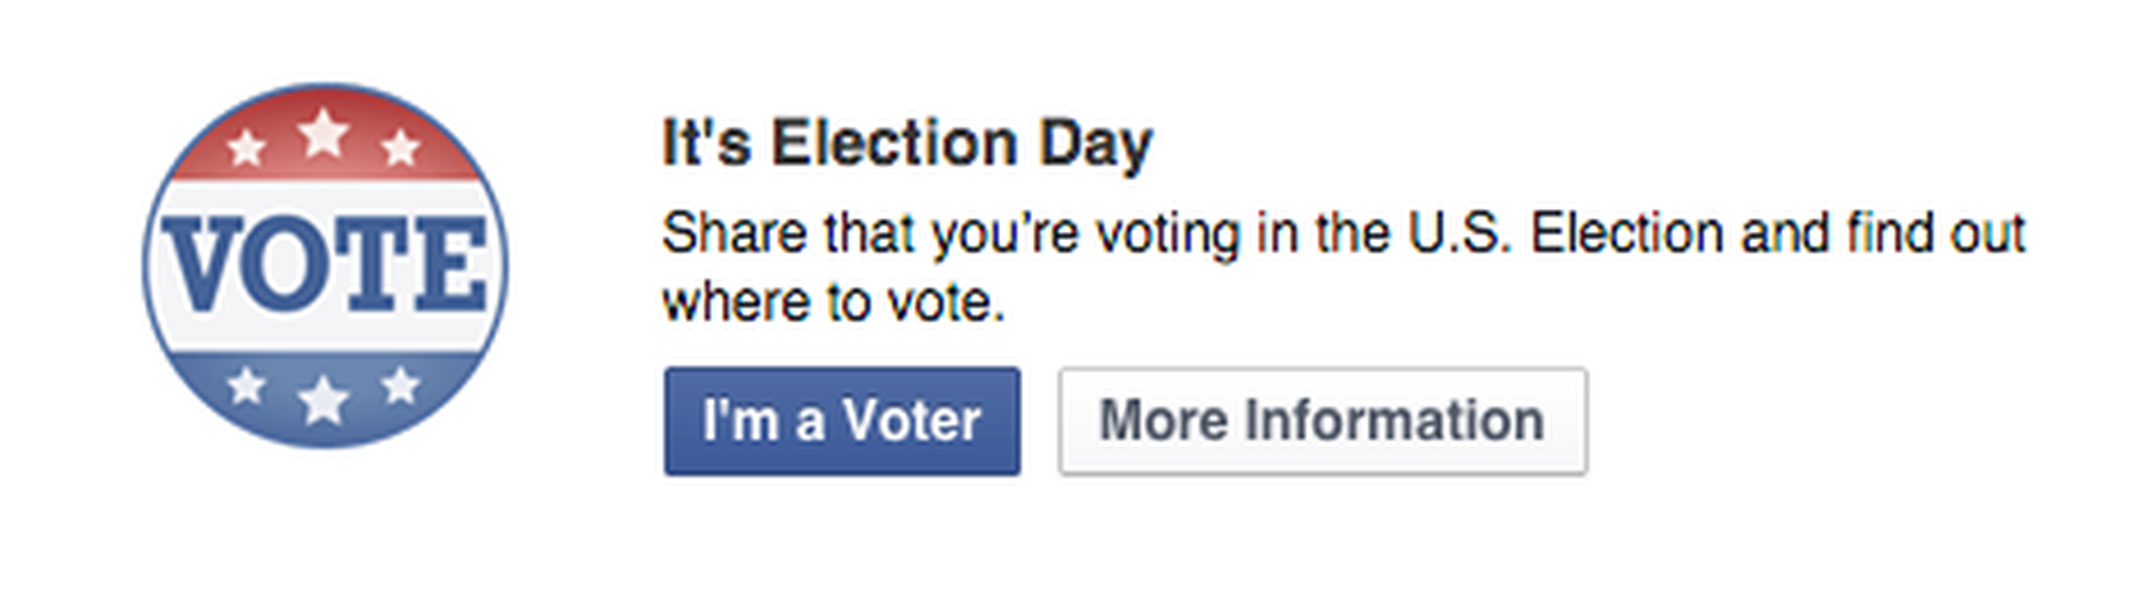 Facebook&#039;s &#039;I&#039;m a Voter&#039; widget could actually encourage on-the-fence voters to cast a ballot